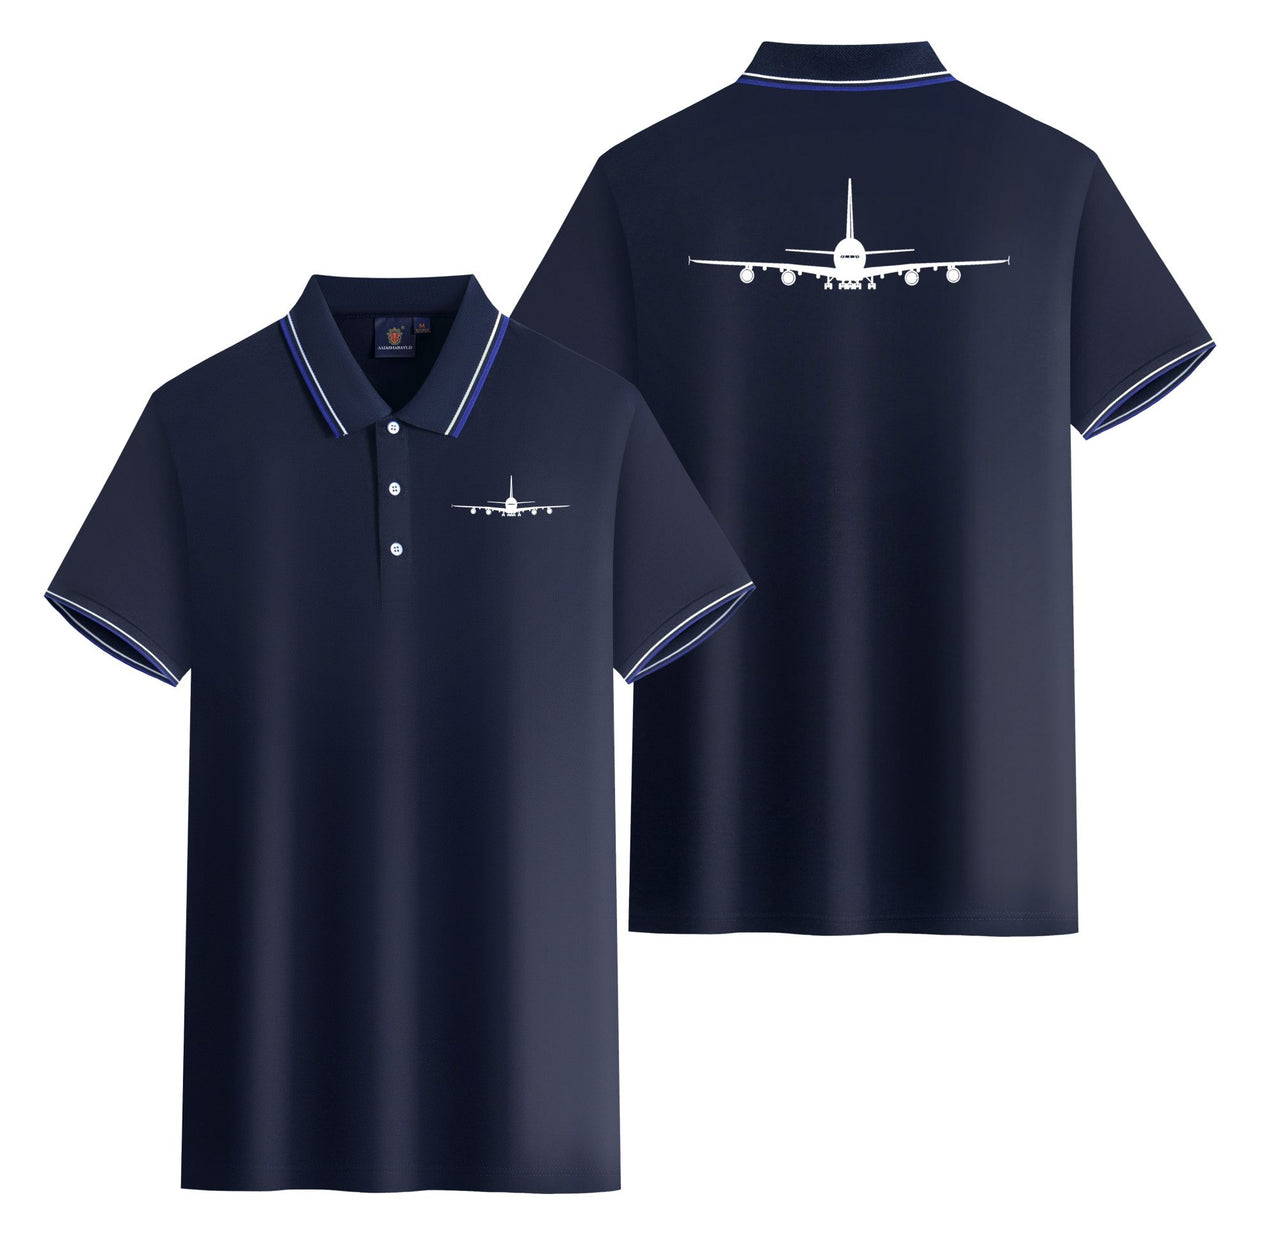 Airbus A380 Silhouette Designed Stylish Polo T-Shirts (Double-Side)